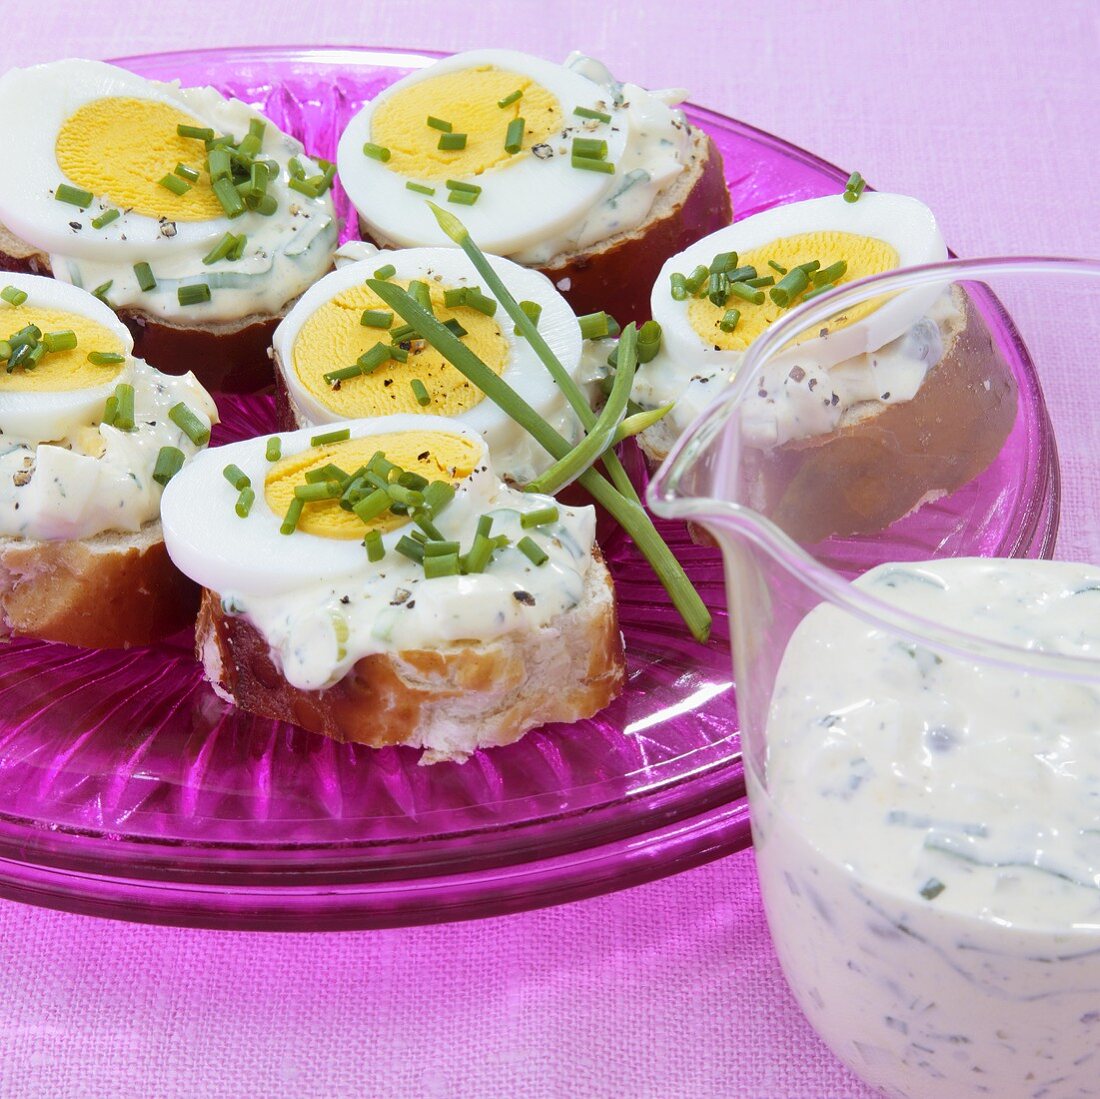 Open sandwiches with remoulade, hard-boiled eggs and chives